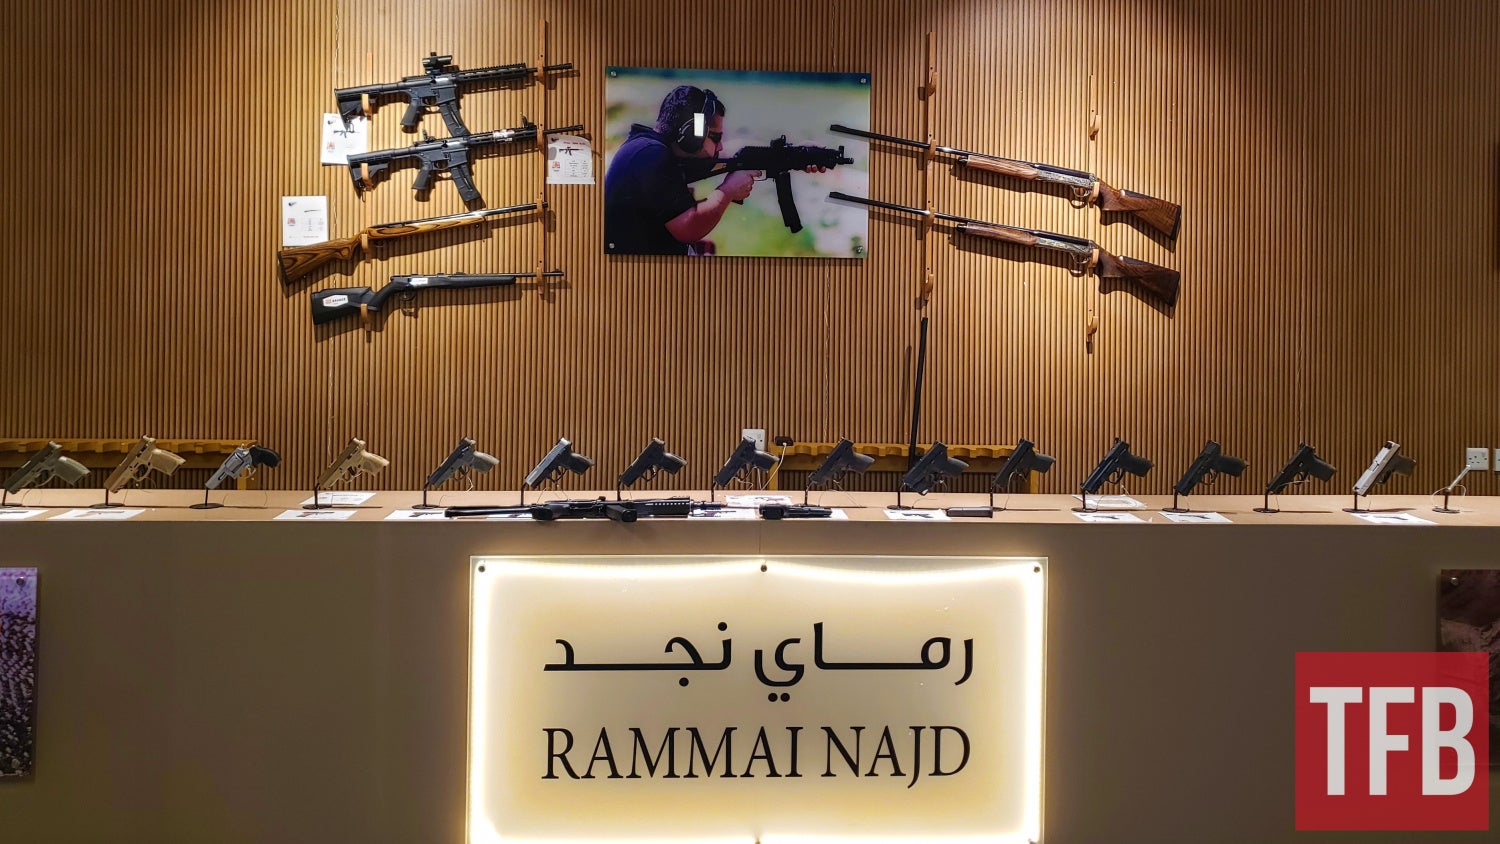 Central display at the Rammai Najd booth